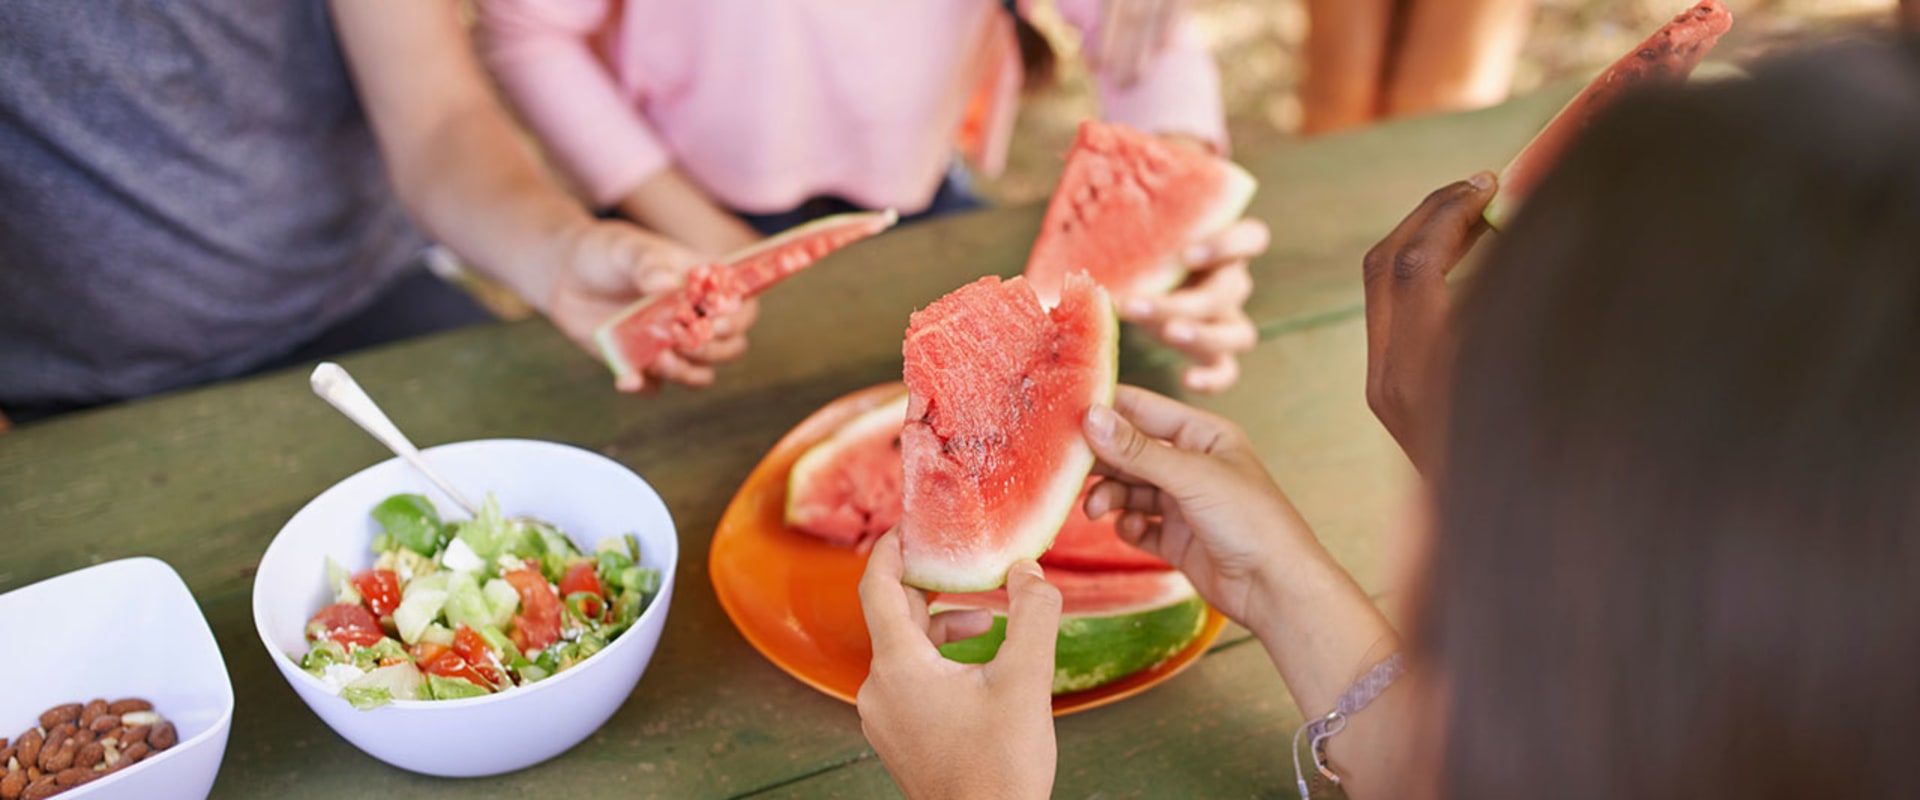 Healthy Eating for Kids: Benefits and Food Preferences